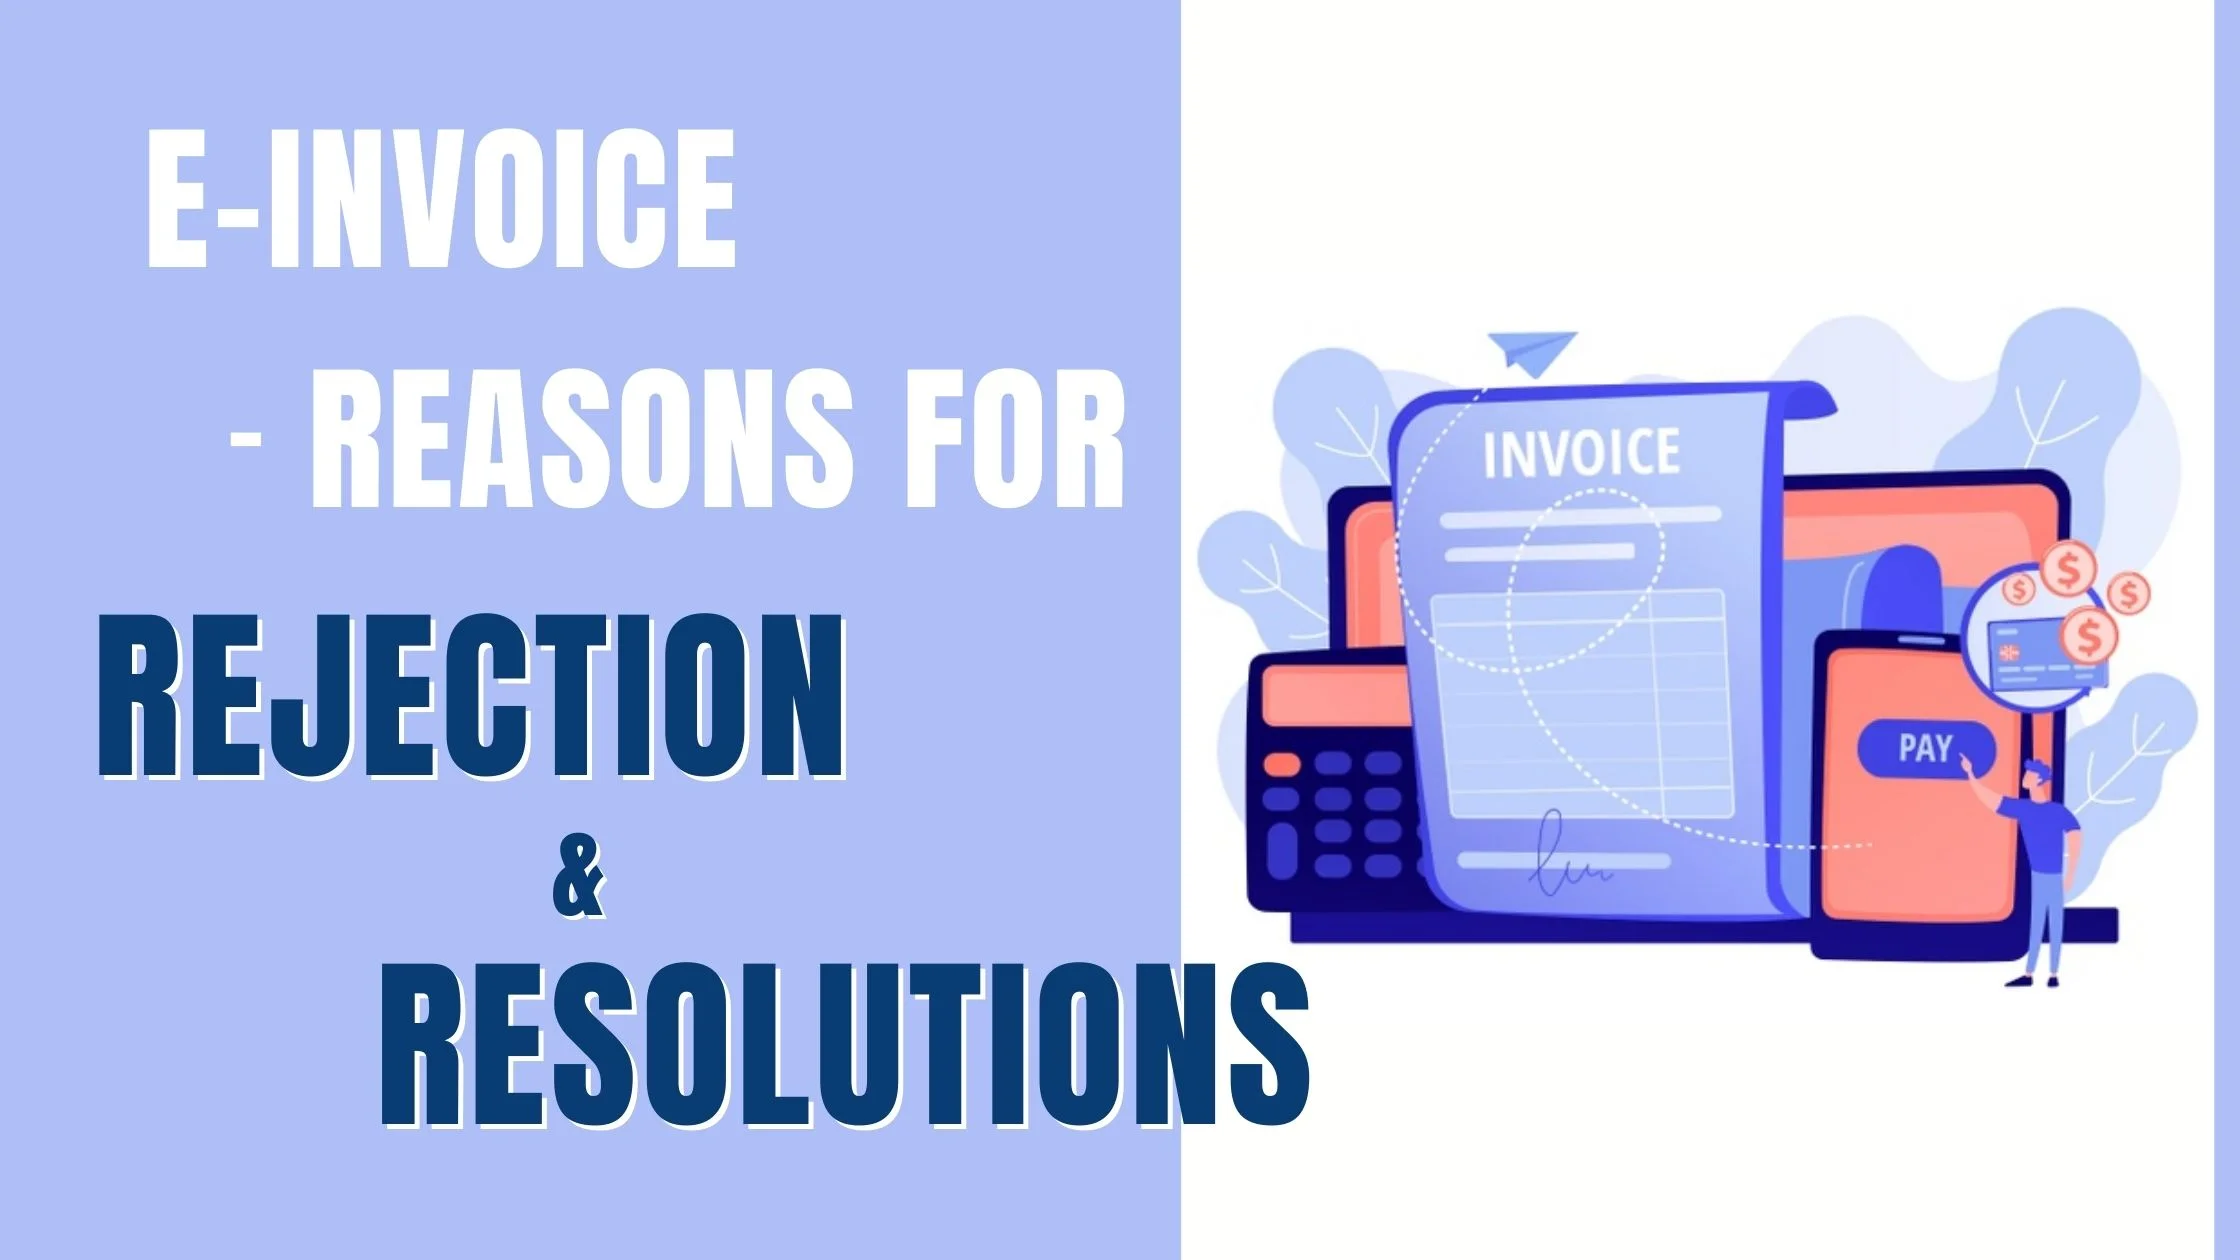 Reasons for Rejection of e-Invoice and Resolutions